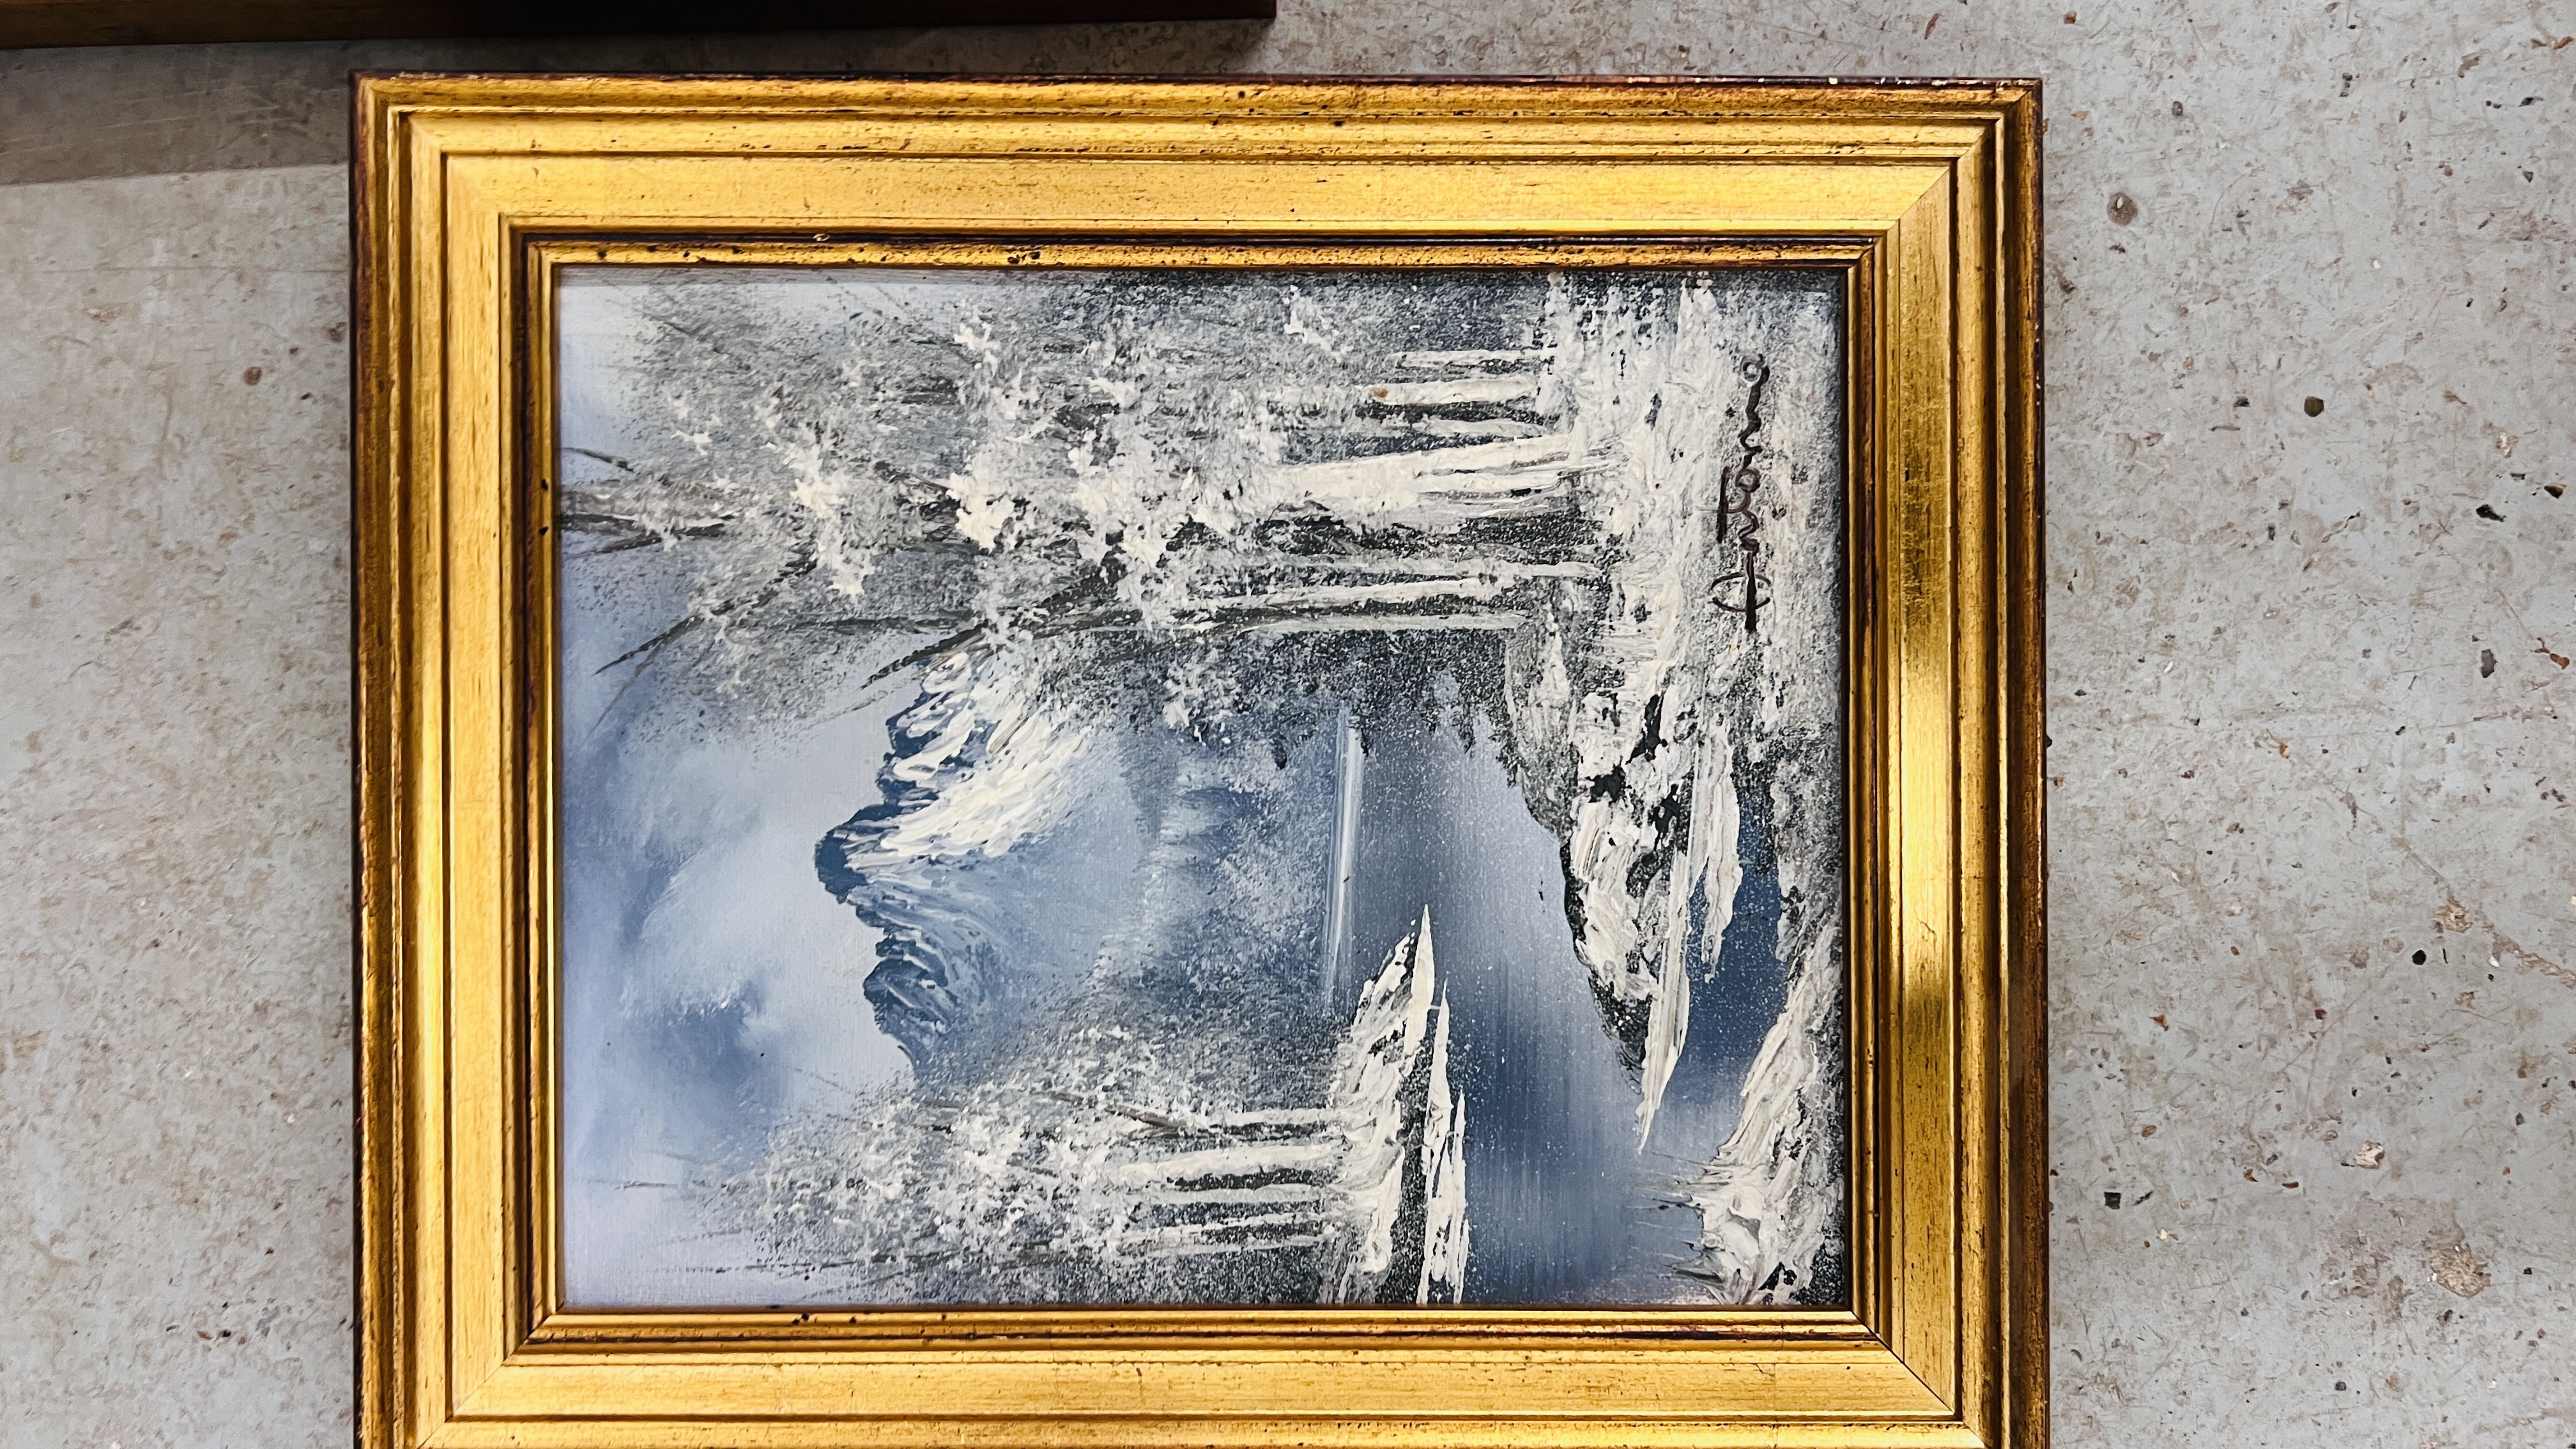 A PAIR OF GILT FRAMED OIL ON CANVAS PICTURES DEPICTING COTTAGES IN A SNOWY LANDSCAPE W 105. - Image 6 of 9